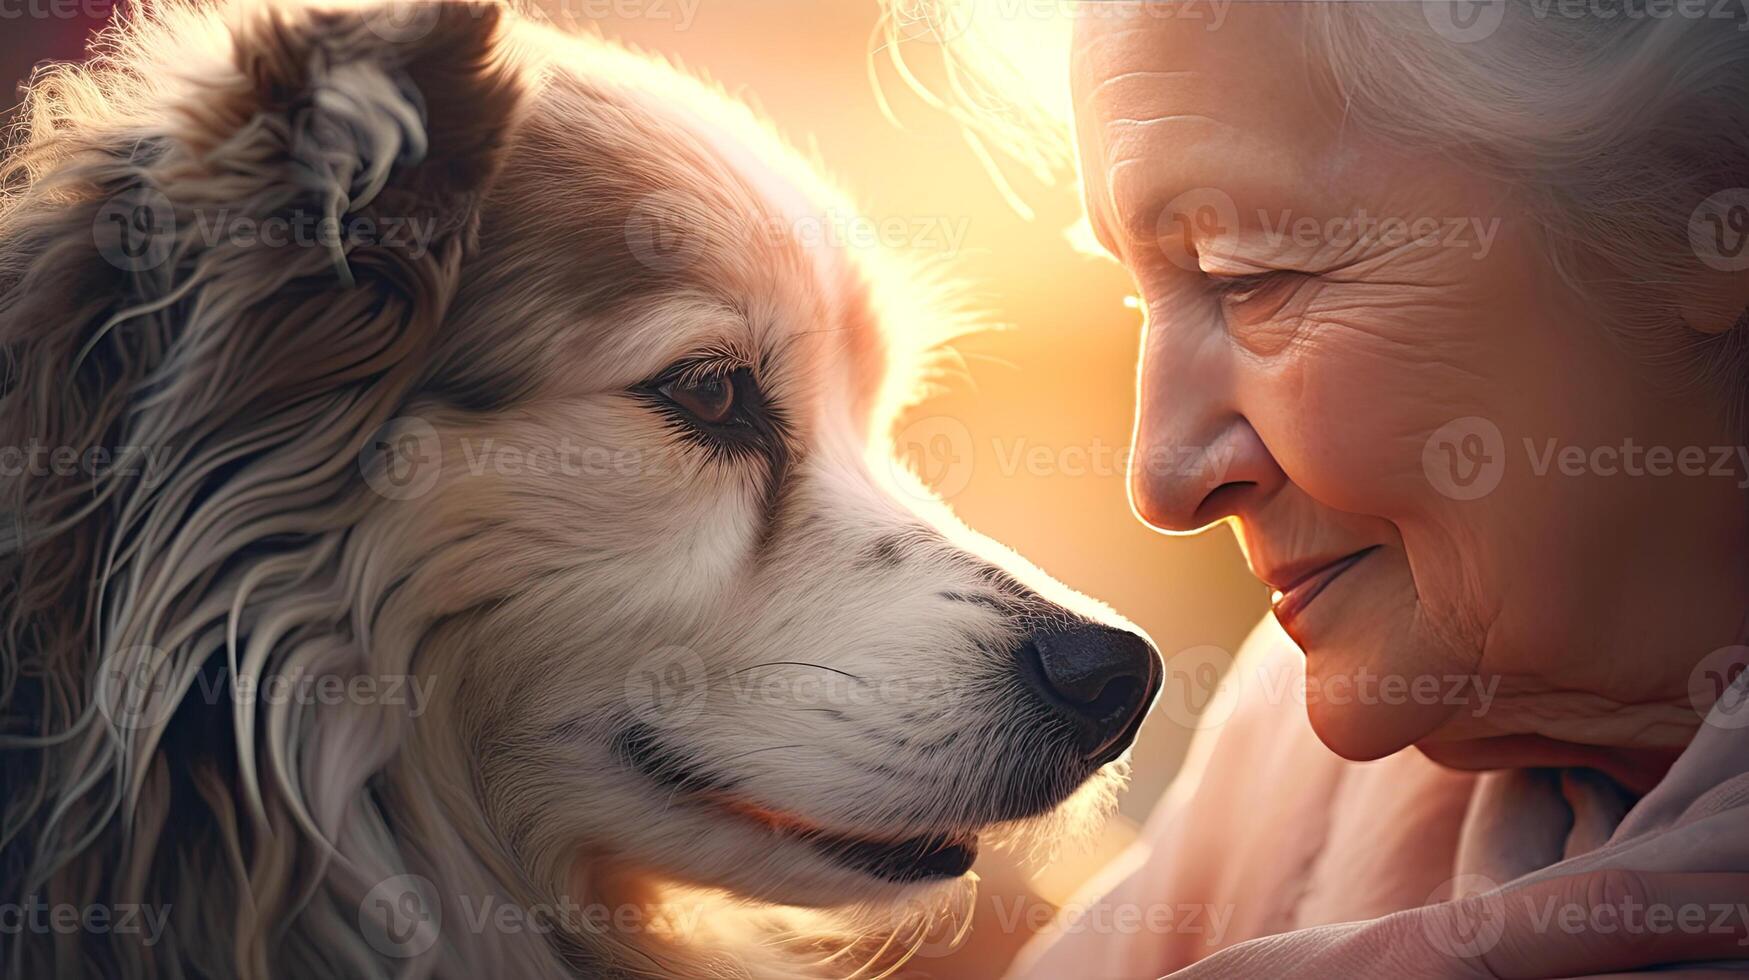 AI generated Old lady looks at her dog close-up portrait. Friendship and tender feelings between human and animal concept. AI generated illustration. photo